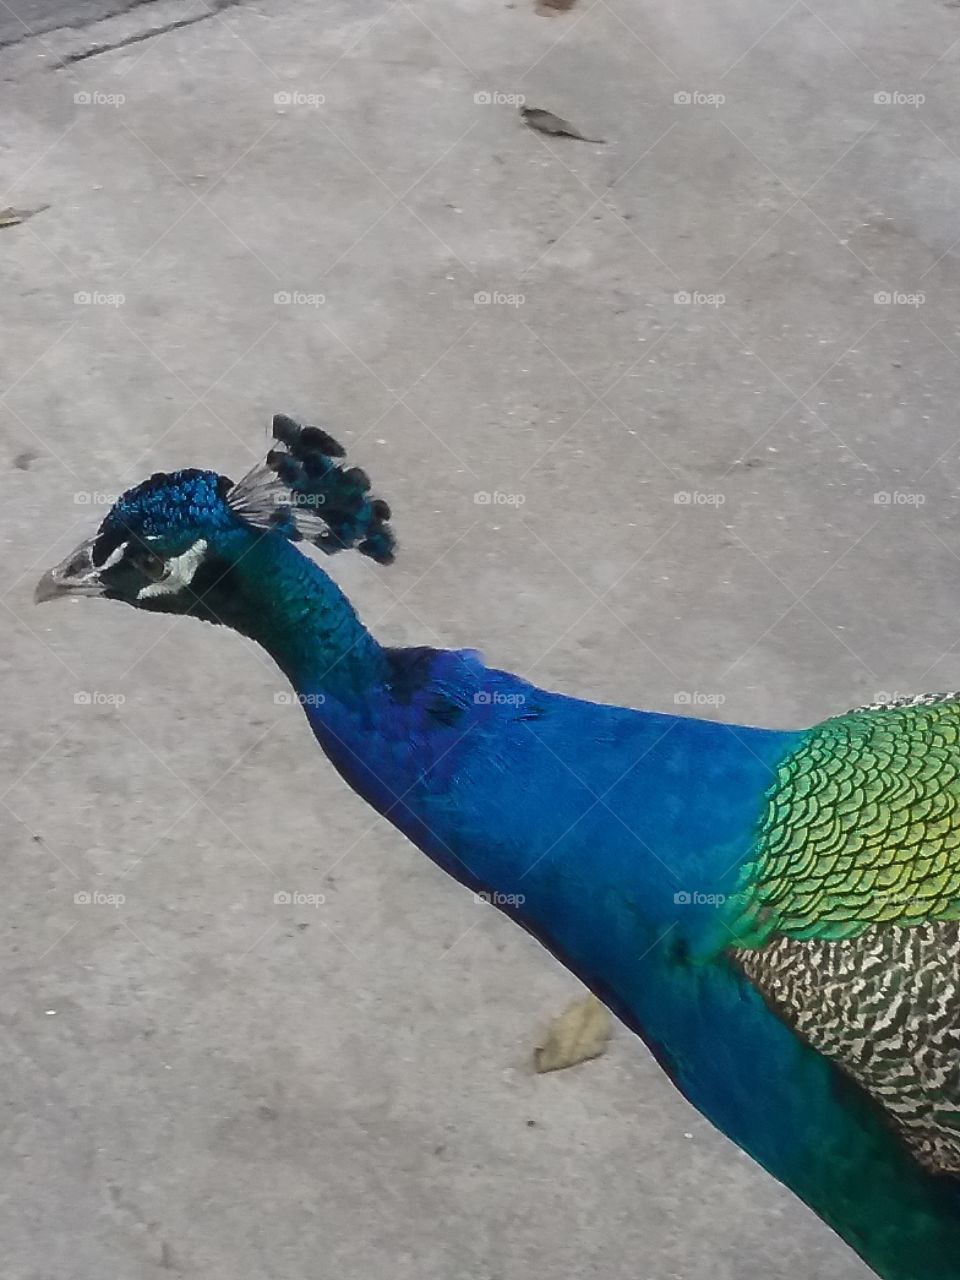 Peacock with outstretched neck